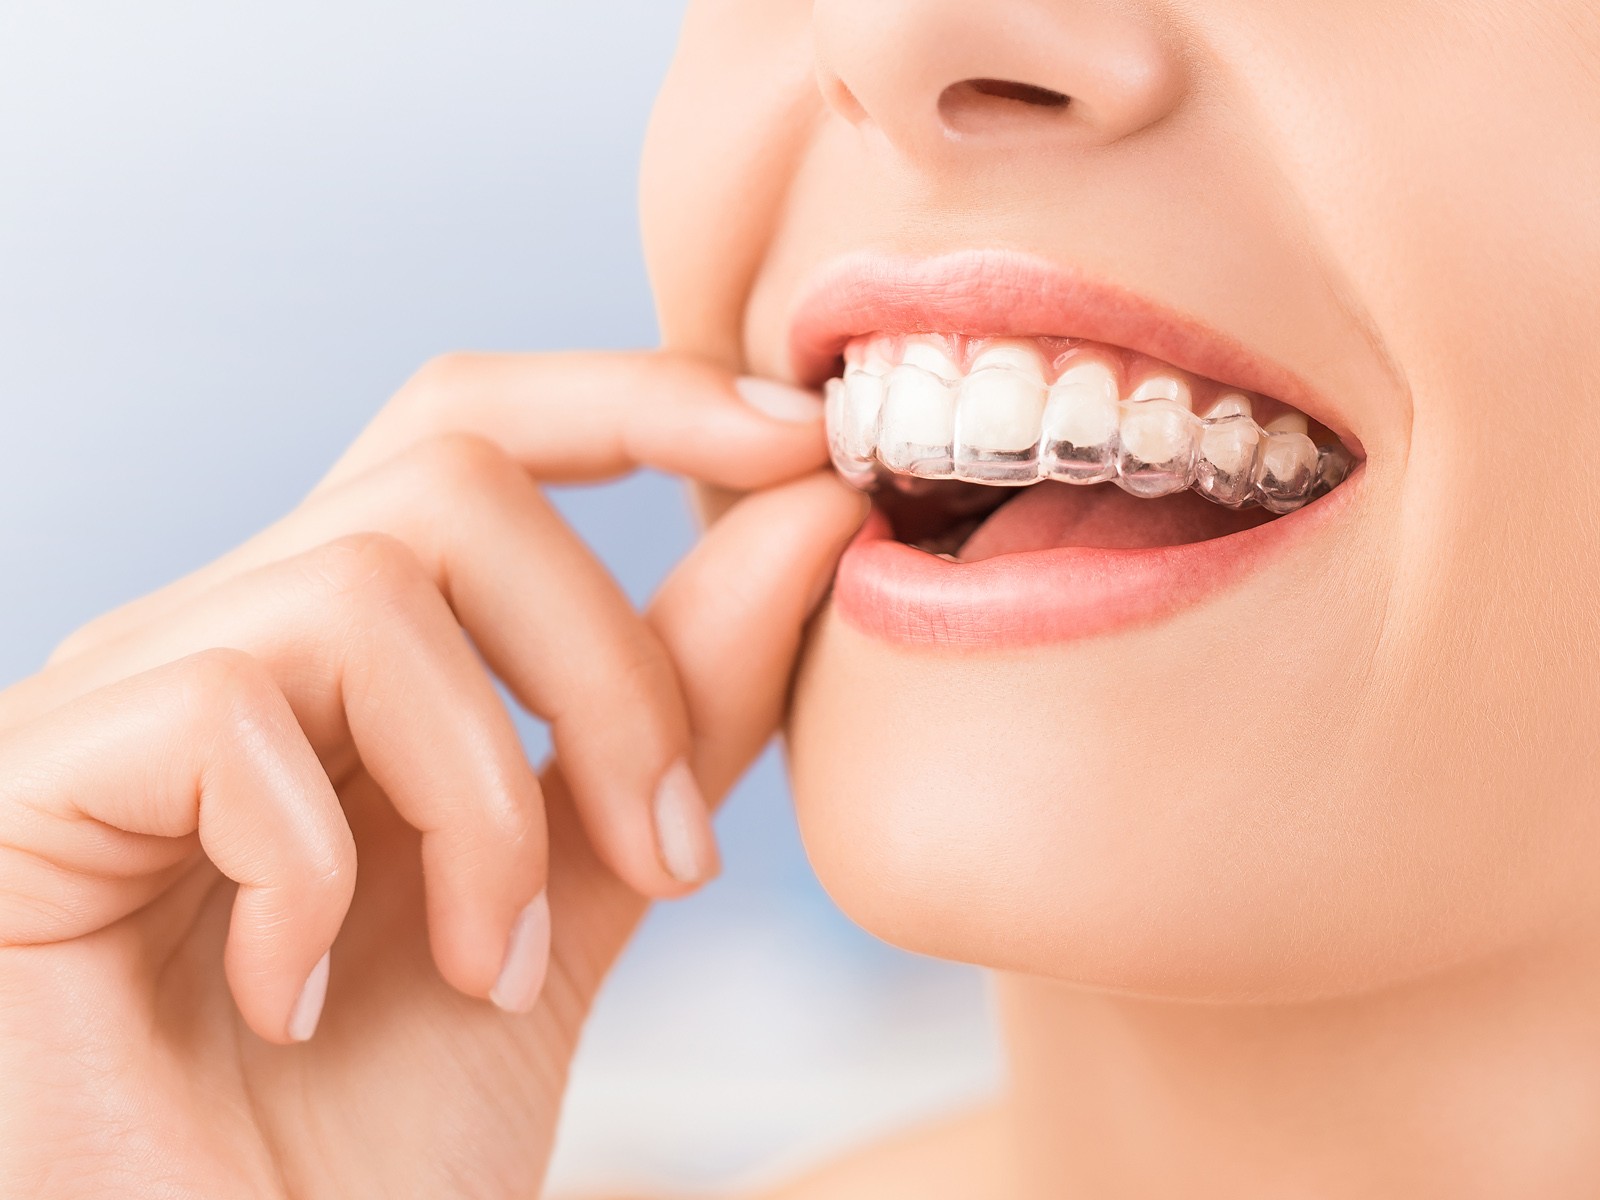 Why Isn’t Invisalign Right For Everyone?